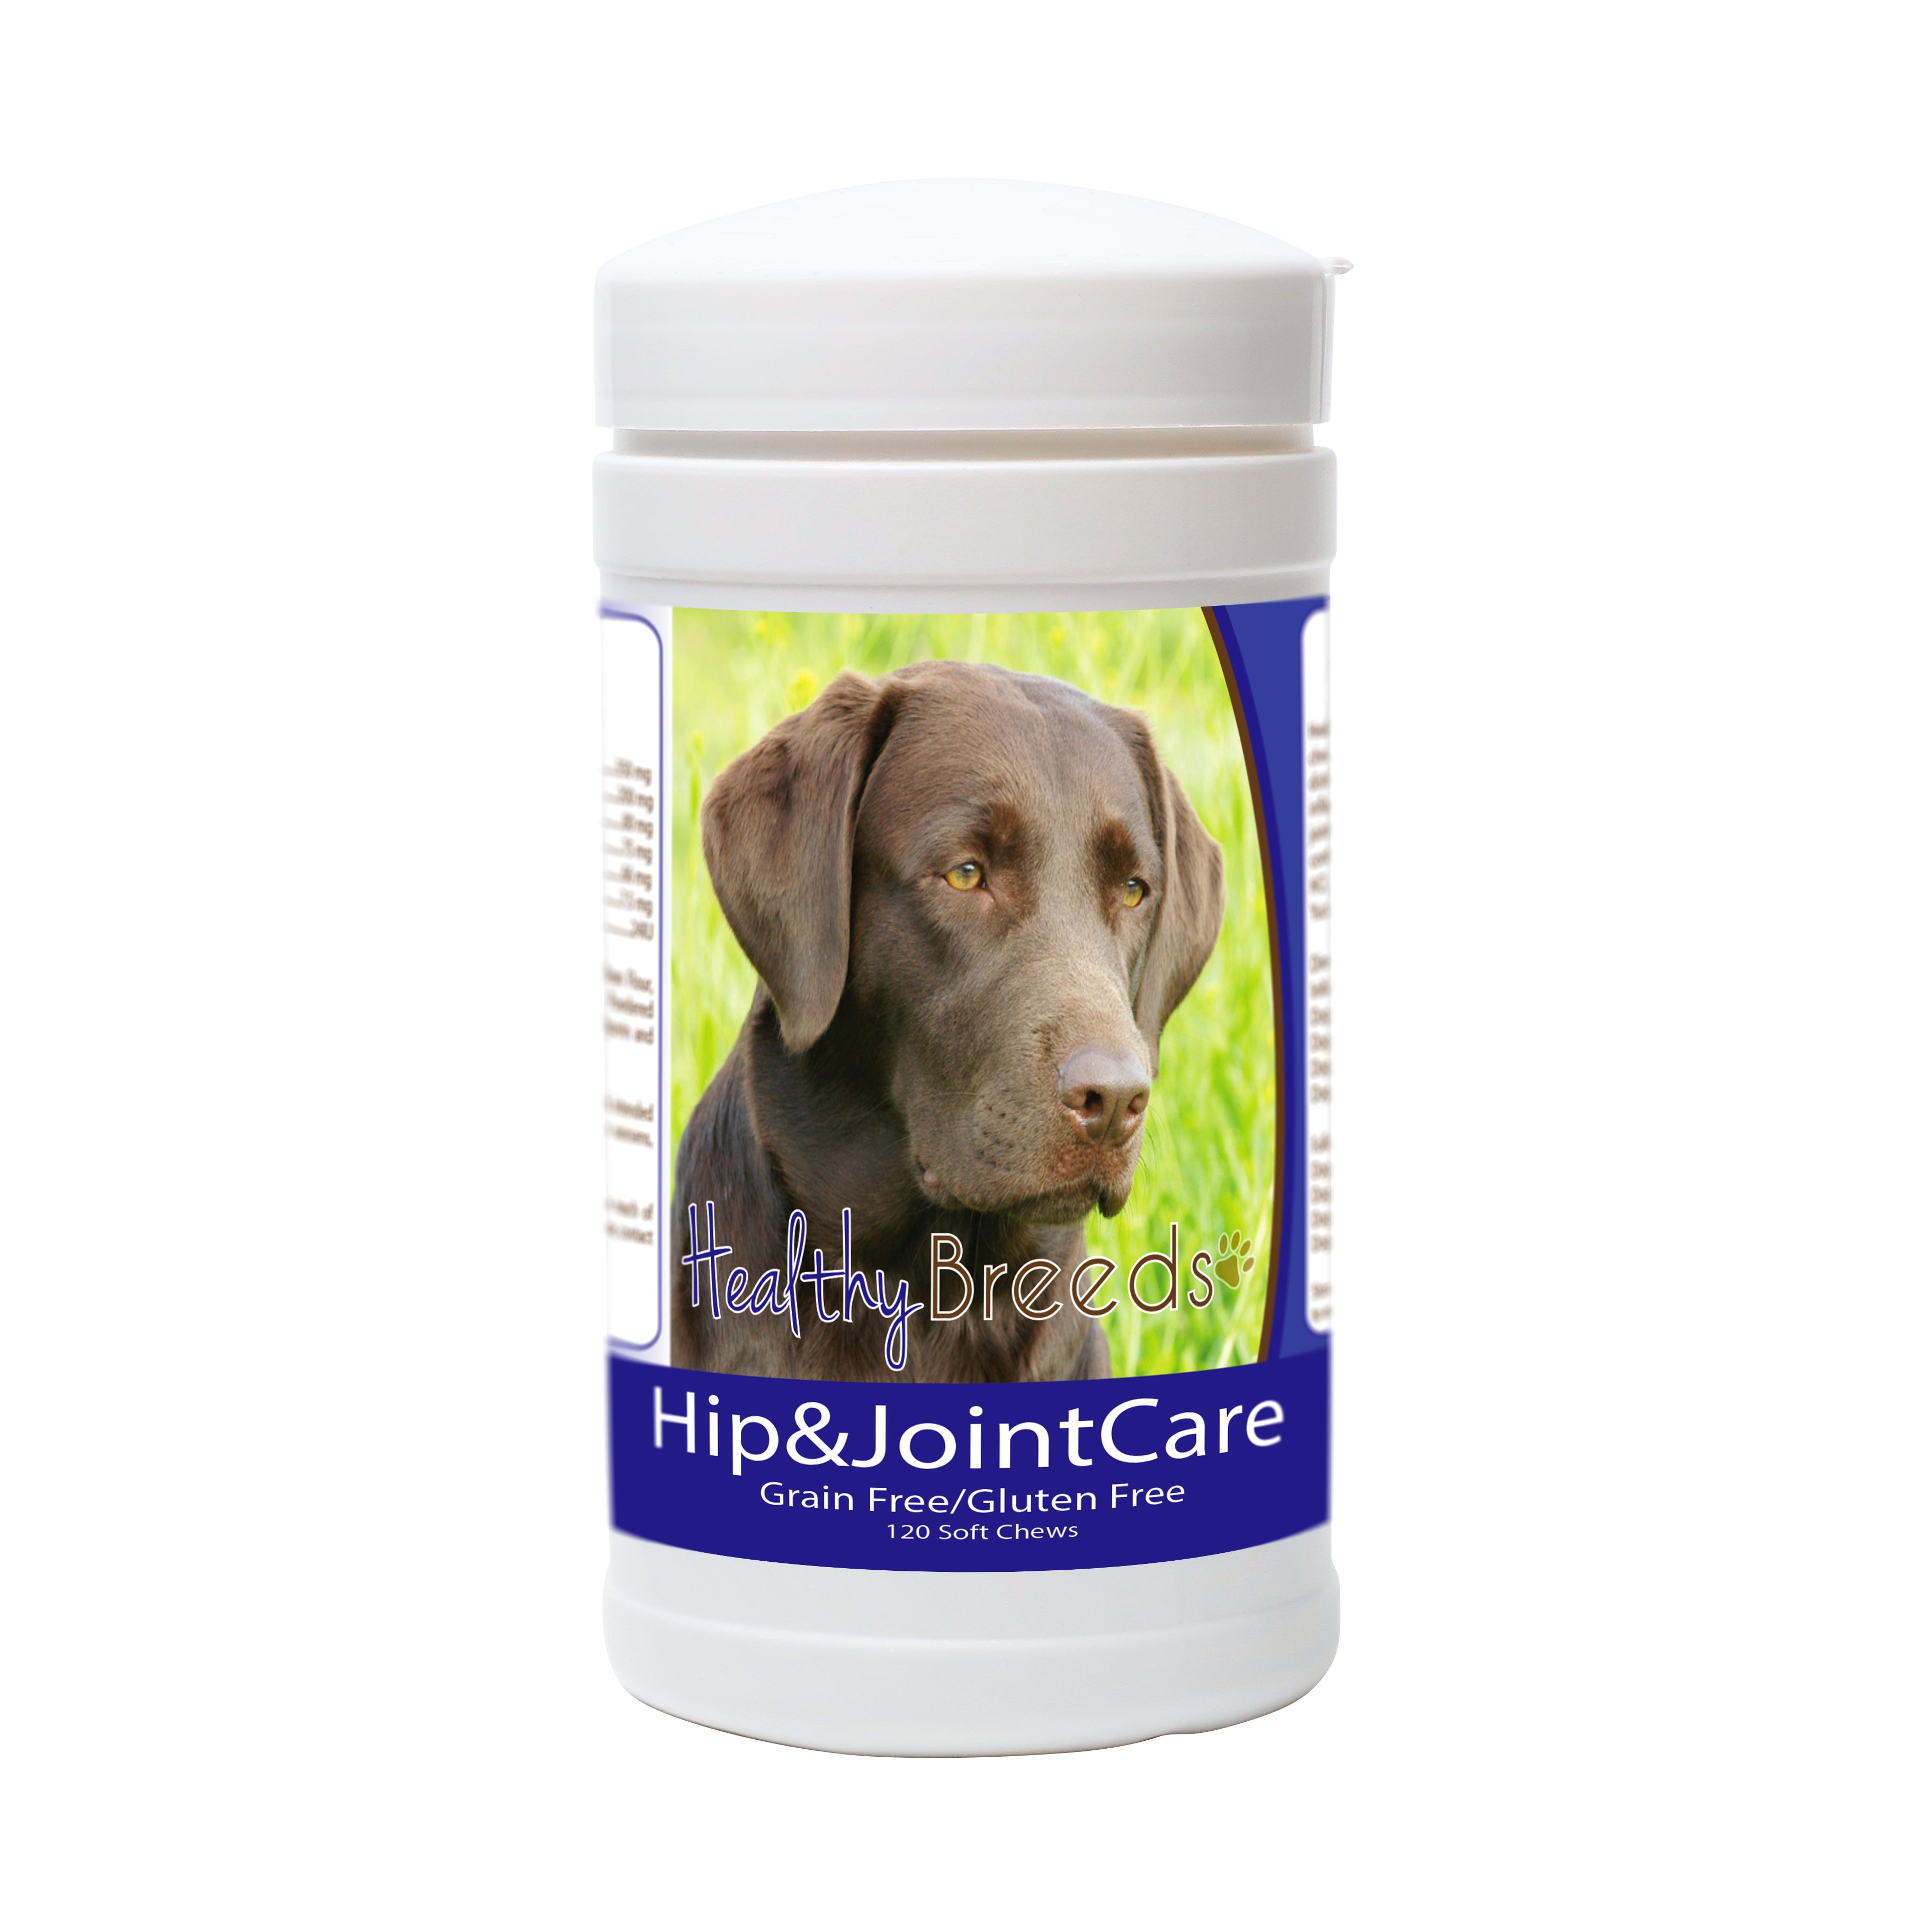 Healthy Breeds Hip & Joint Care Soft Chews - Pit Bull